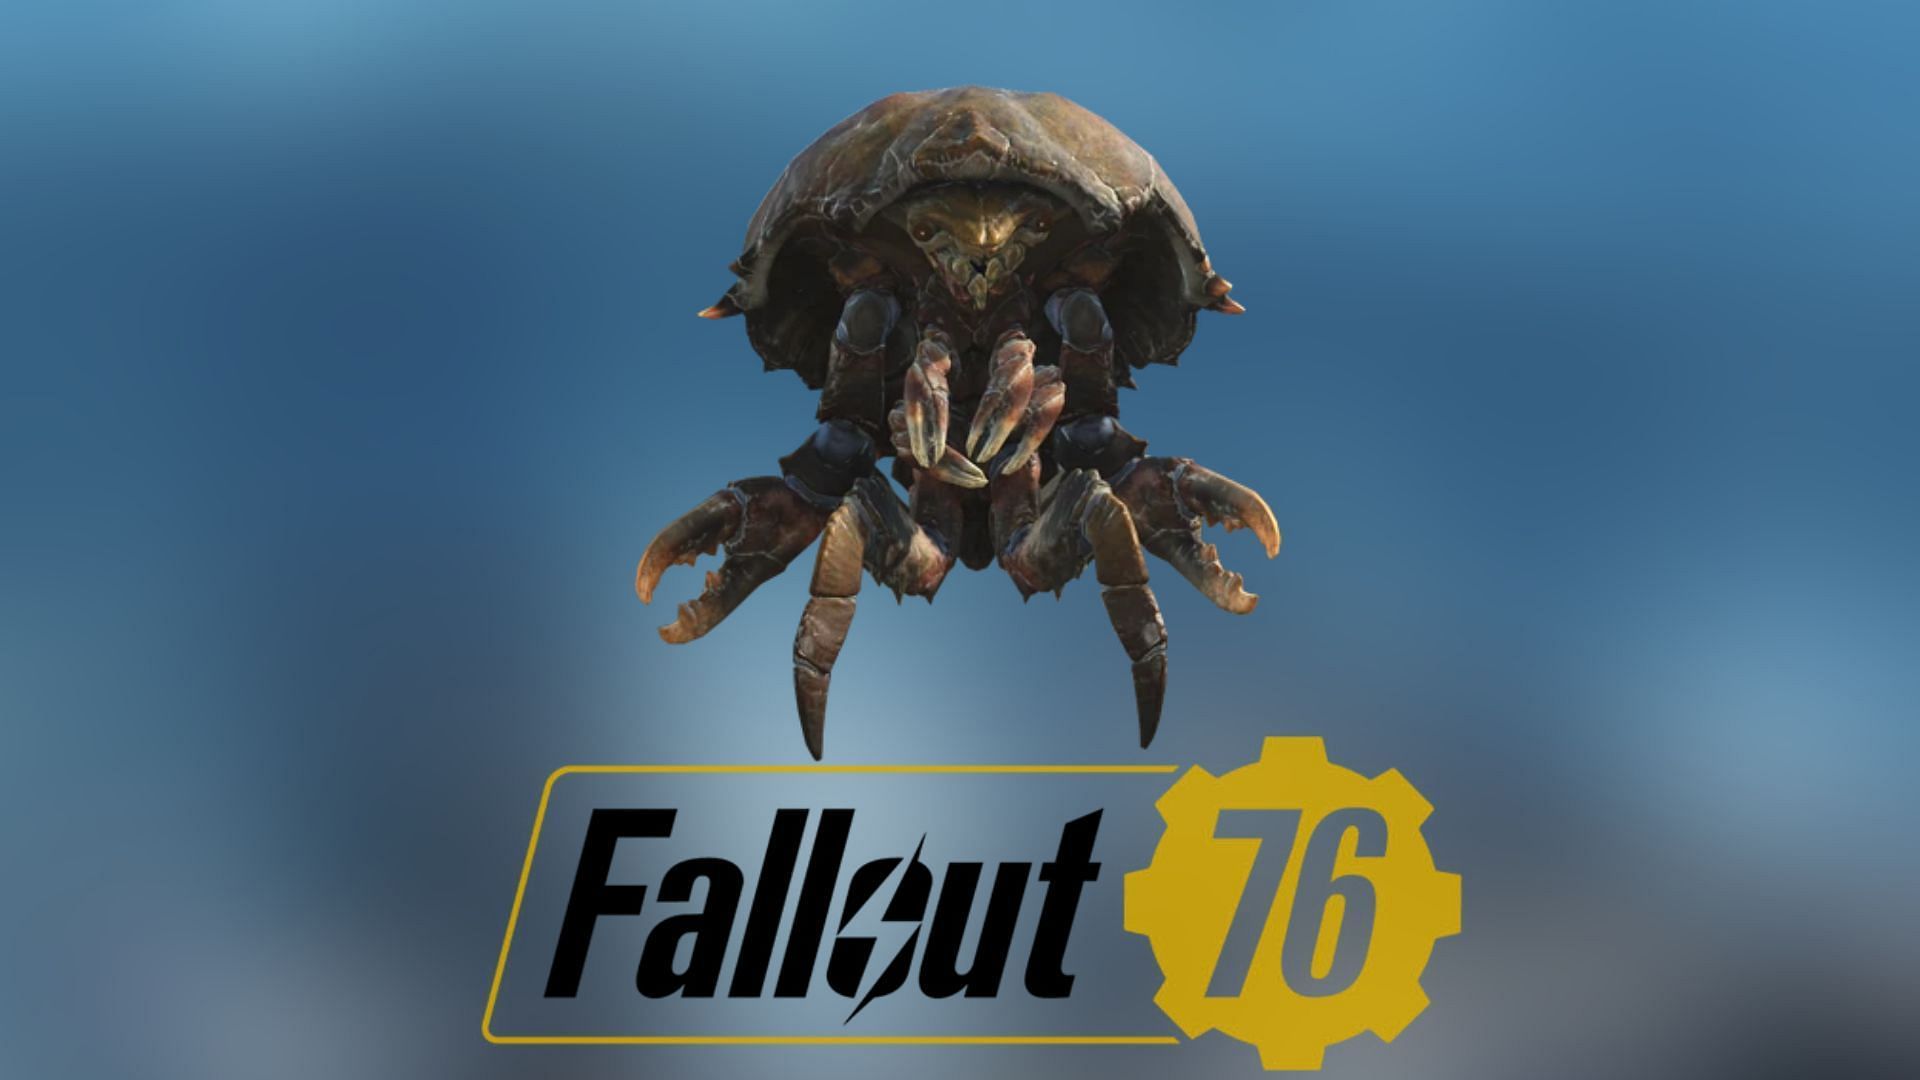 One can complete challenges by killing Mirelurks (Image via Bethesda Game Studios)